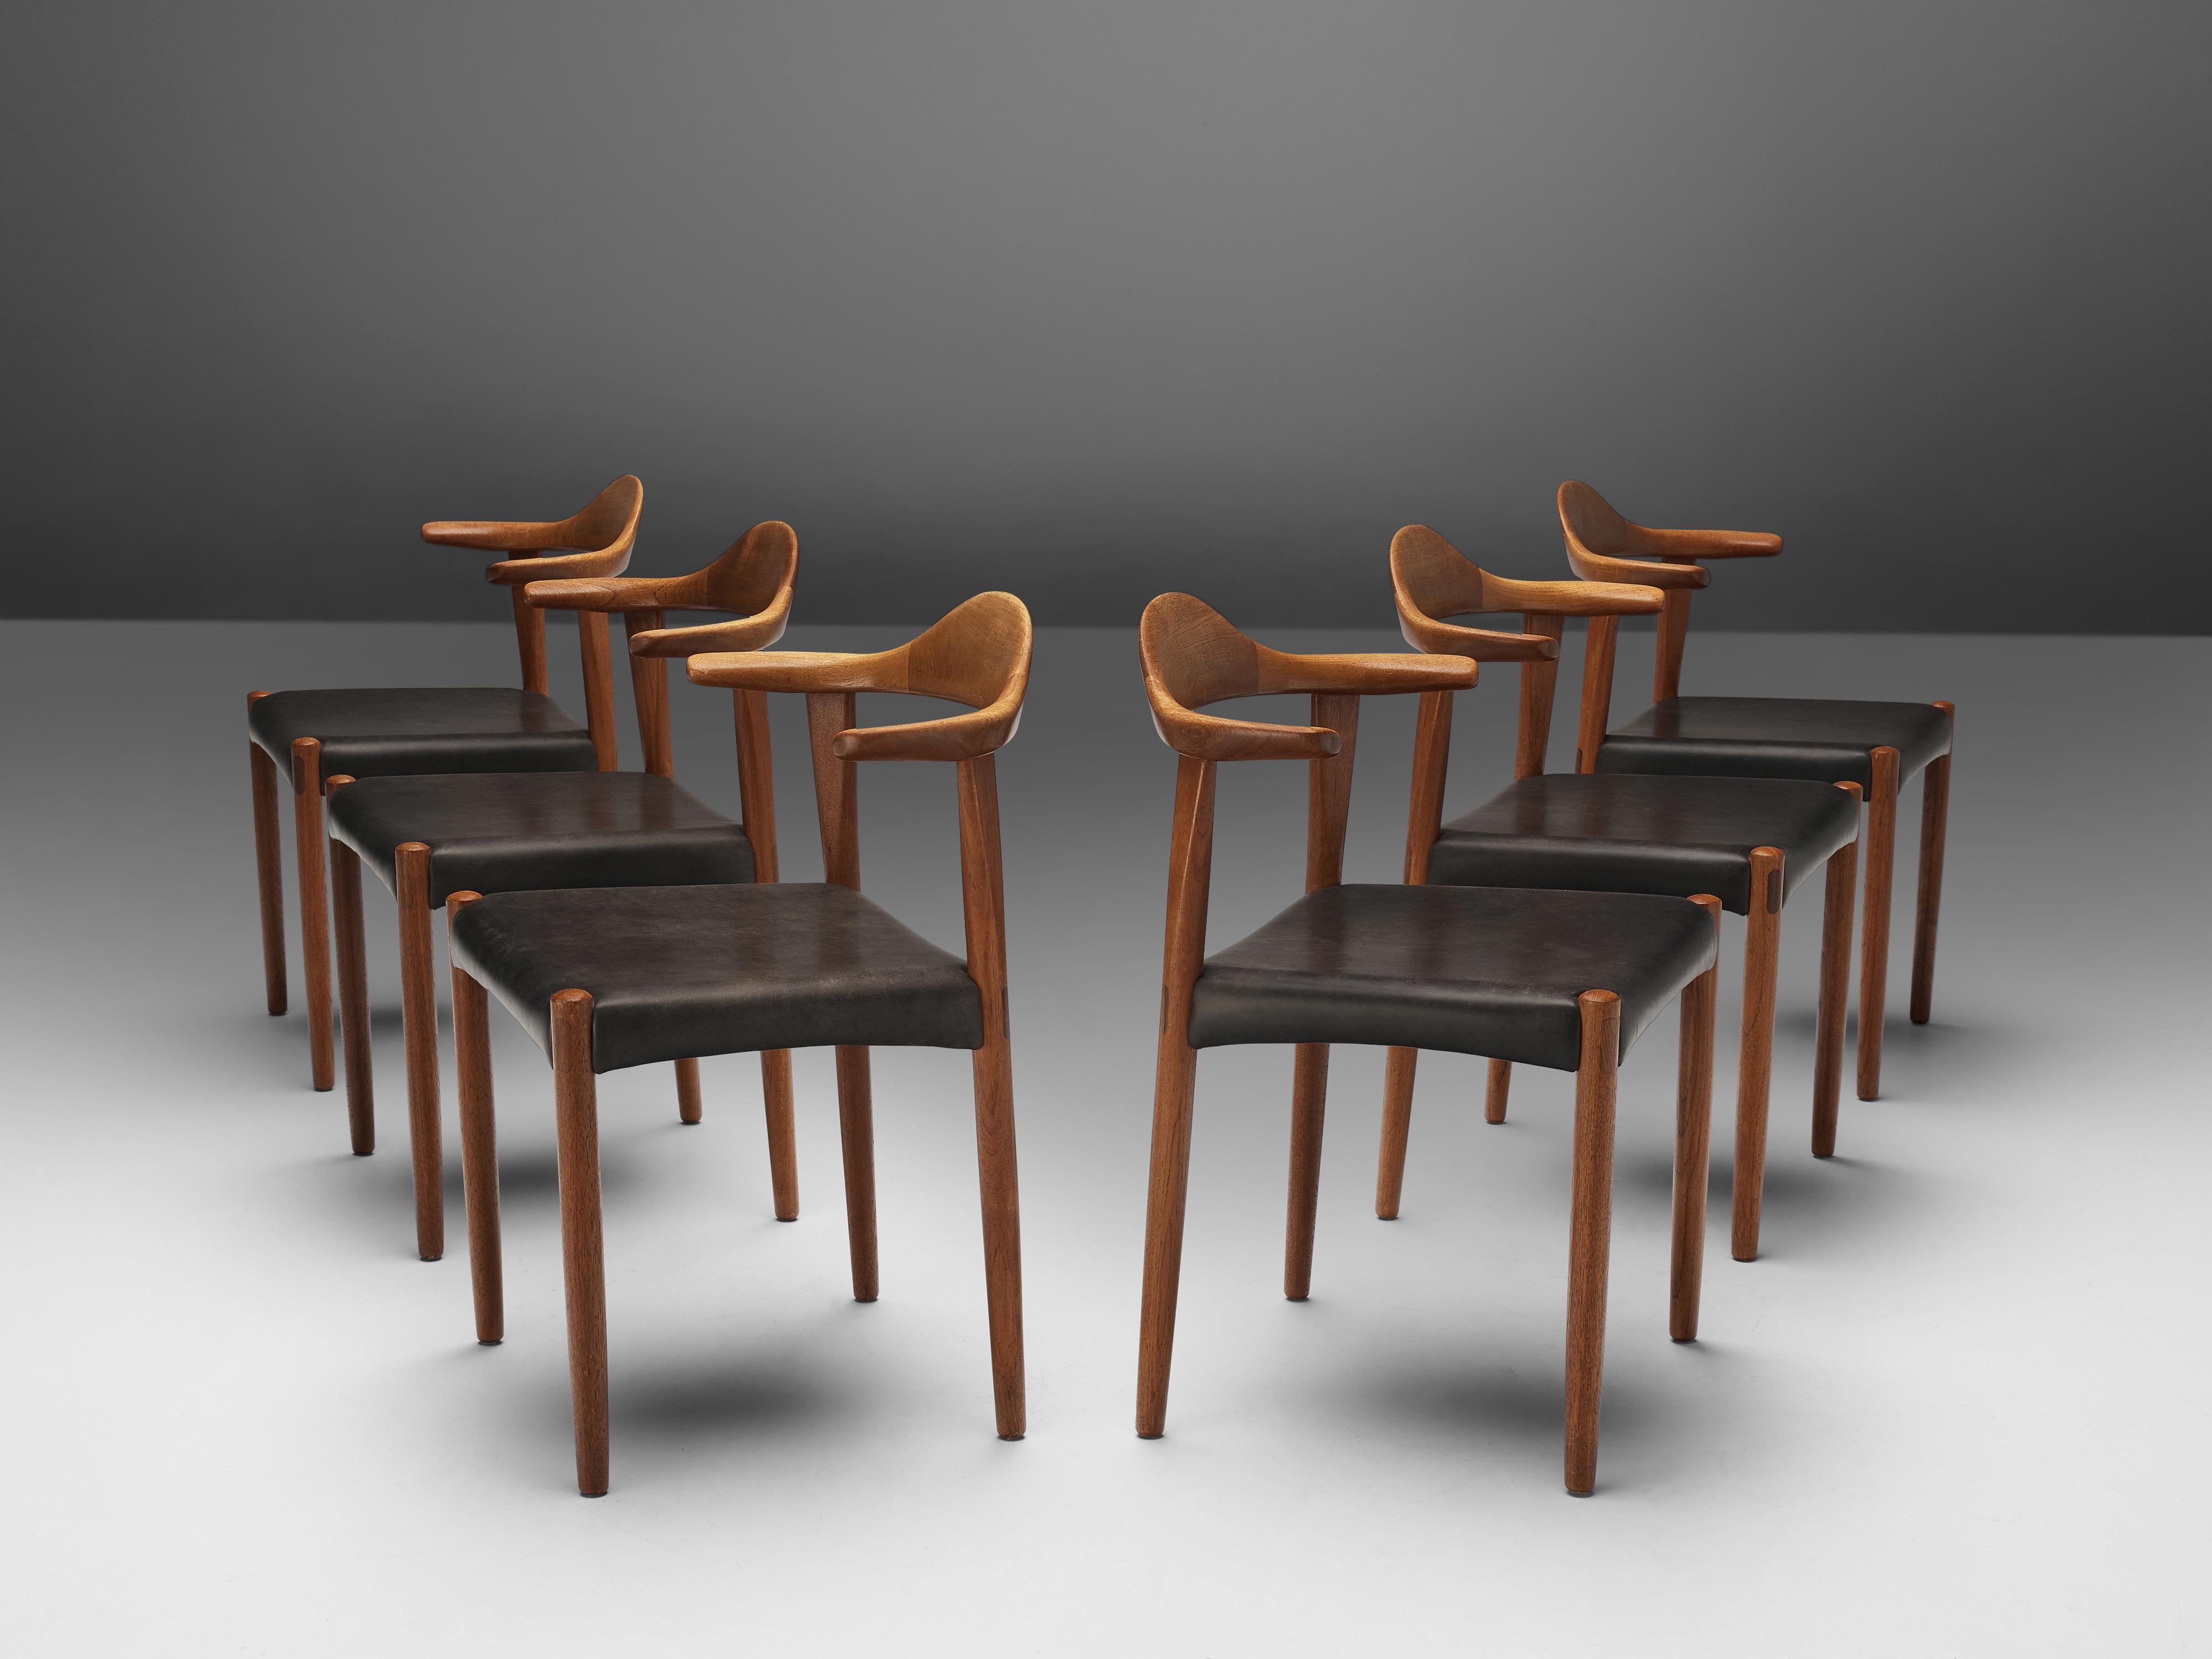 Set of six dining chairs, teak, leather, Denmark, 1960s

What gives this particular model the nickname 'cow horn' is the way the combination of back, and armrest is designed with pointy, tapered ends that remind of a cow's horn. This version of